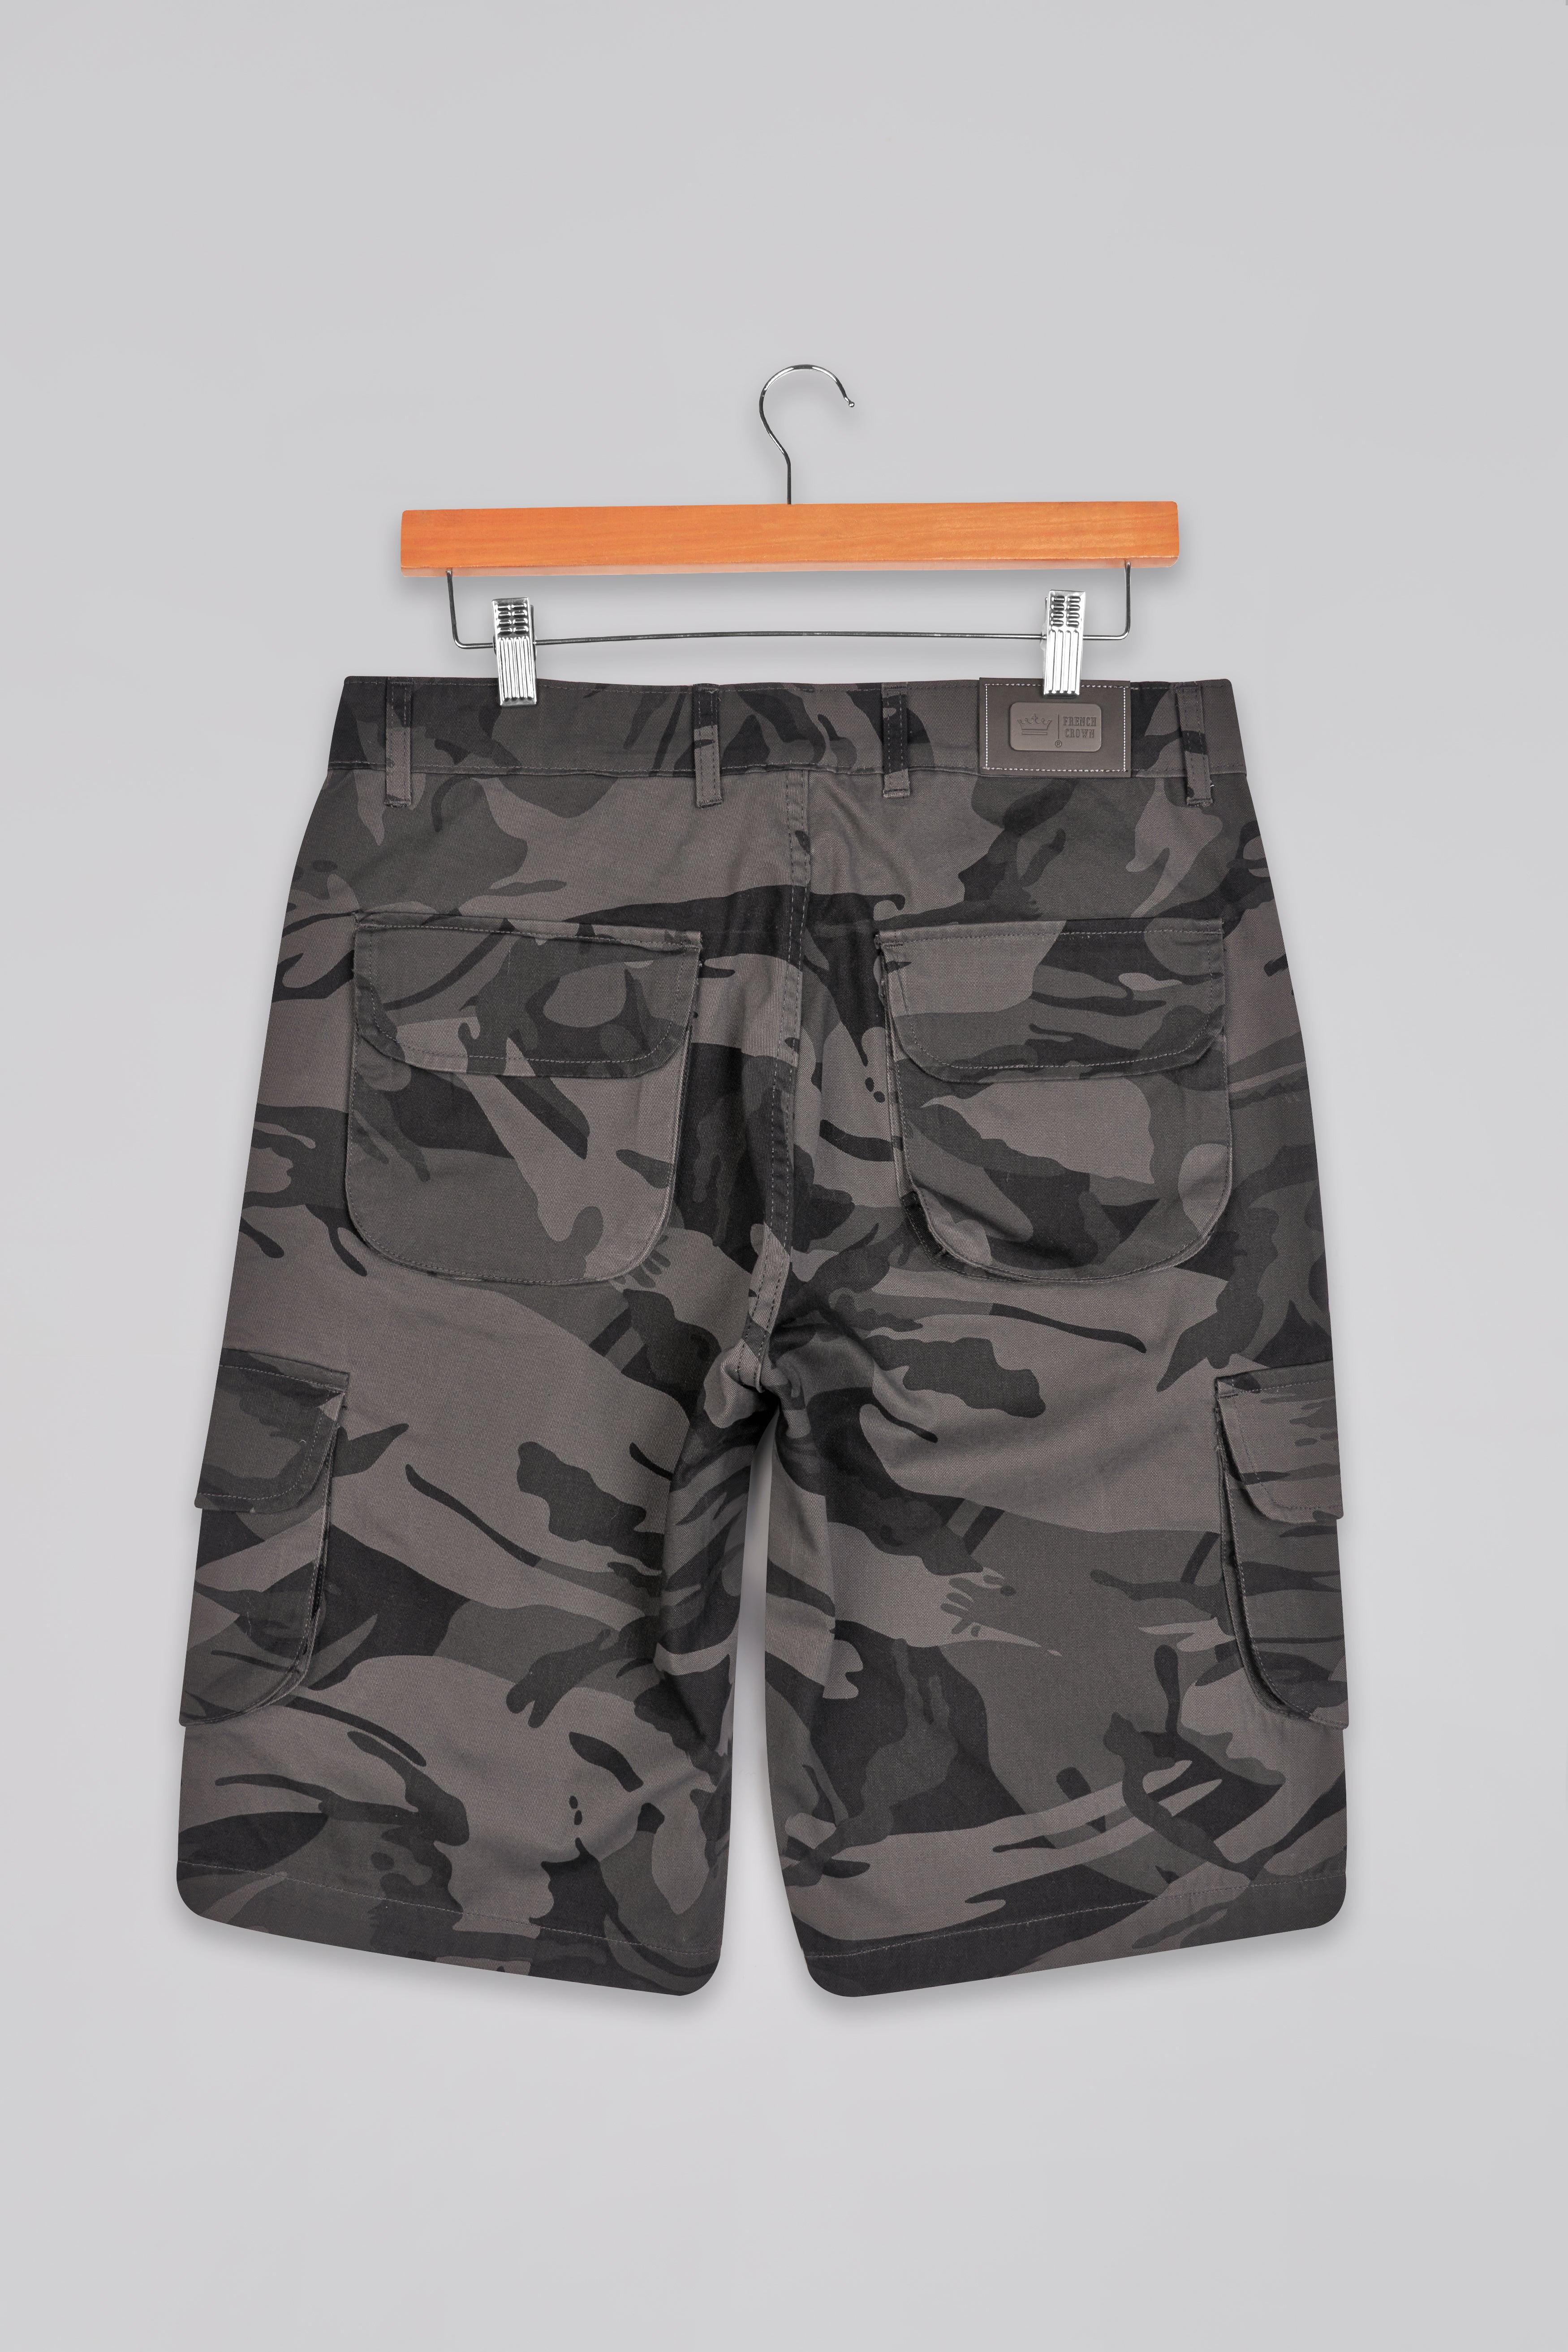 Scorpion Brown with Fuscous Green Camouflage Cargo Shorts SR278-28, SR278-30, SR278-32, SR278-34, SR278-36, SR278-38, SR278-40, SR278-42, SR278-44